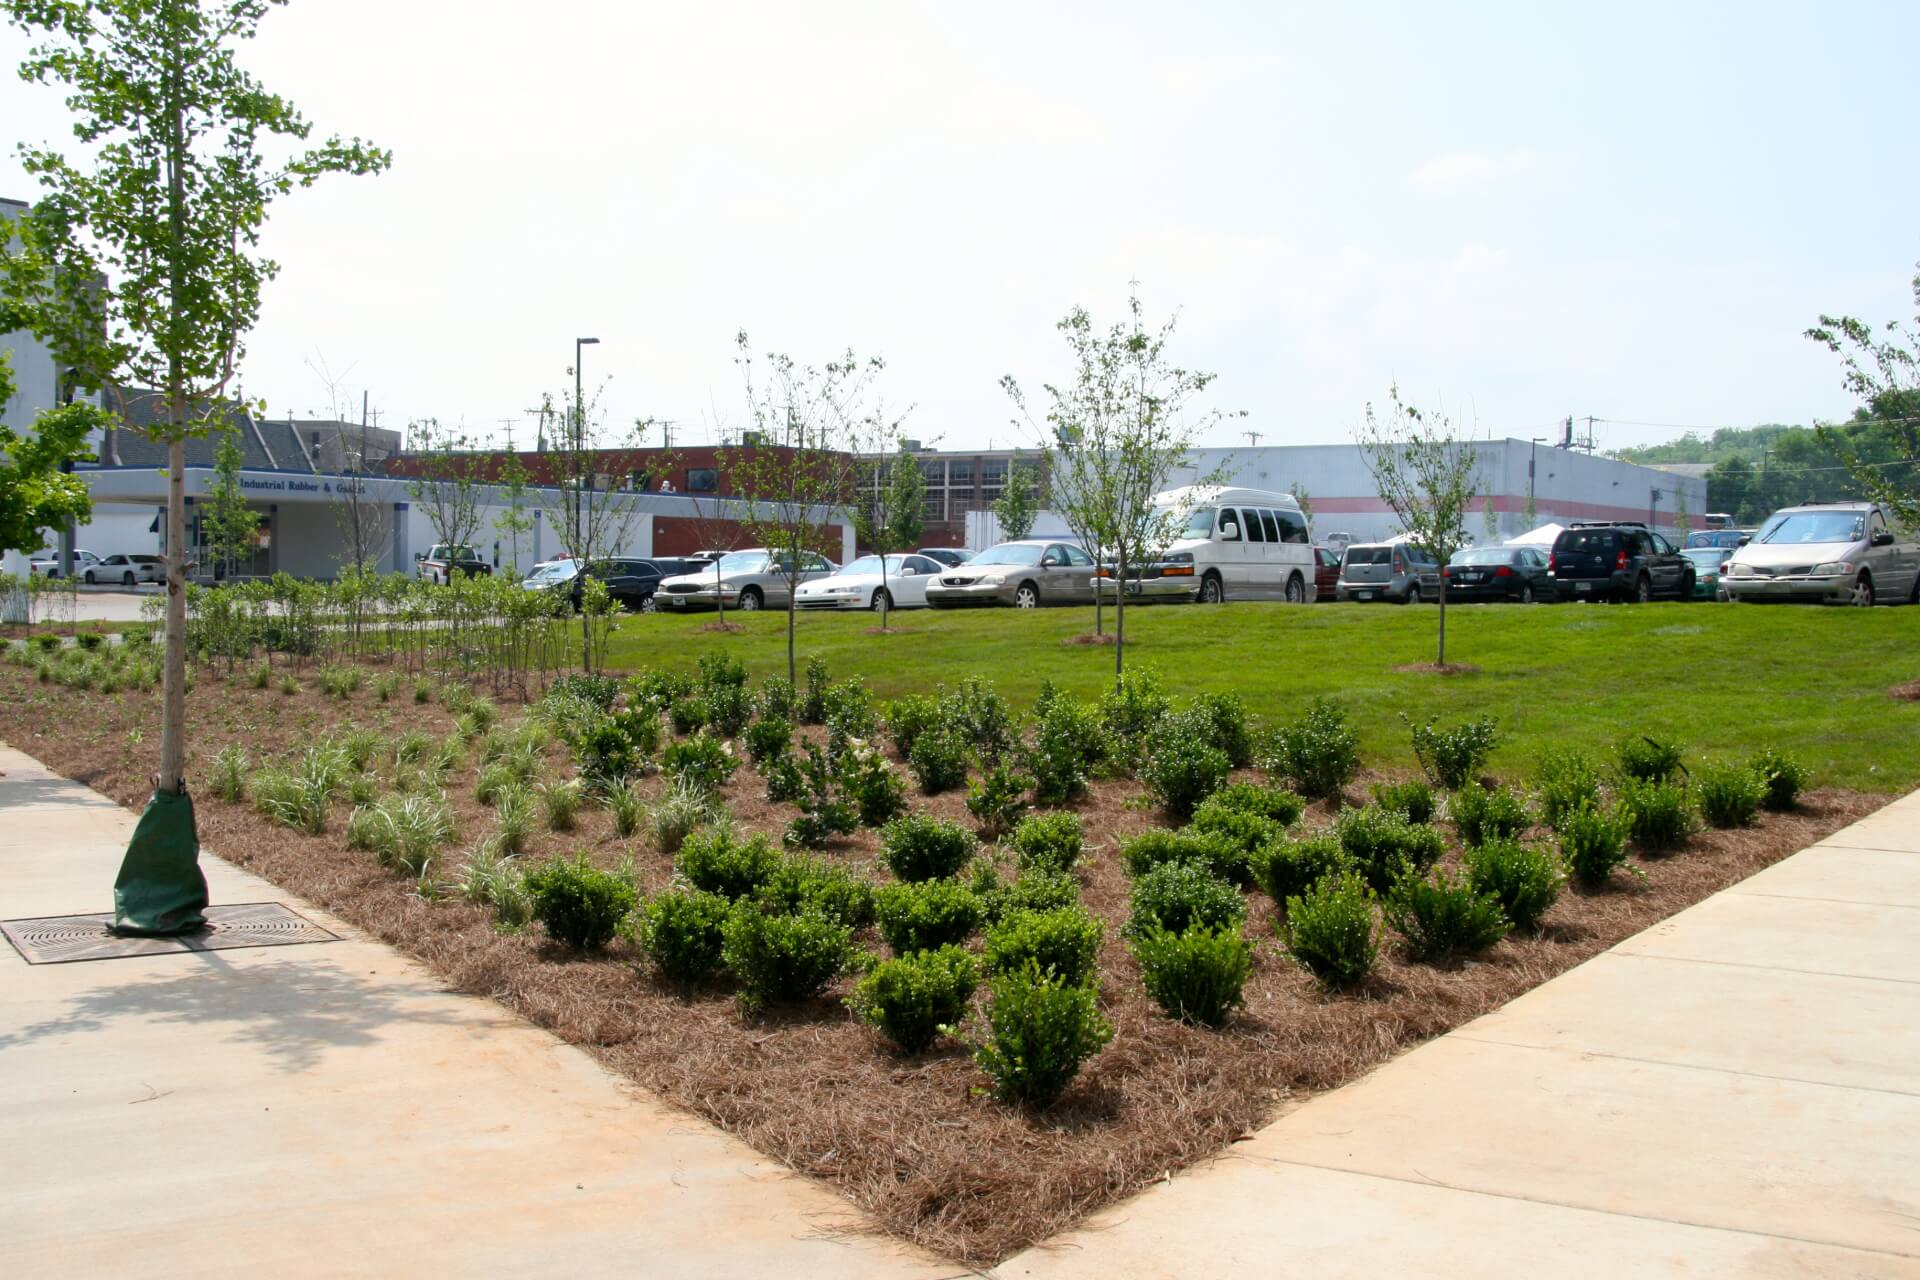 Nashville Rescue Mission with new landscaping and trees